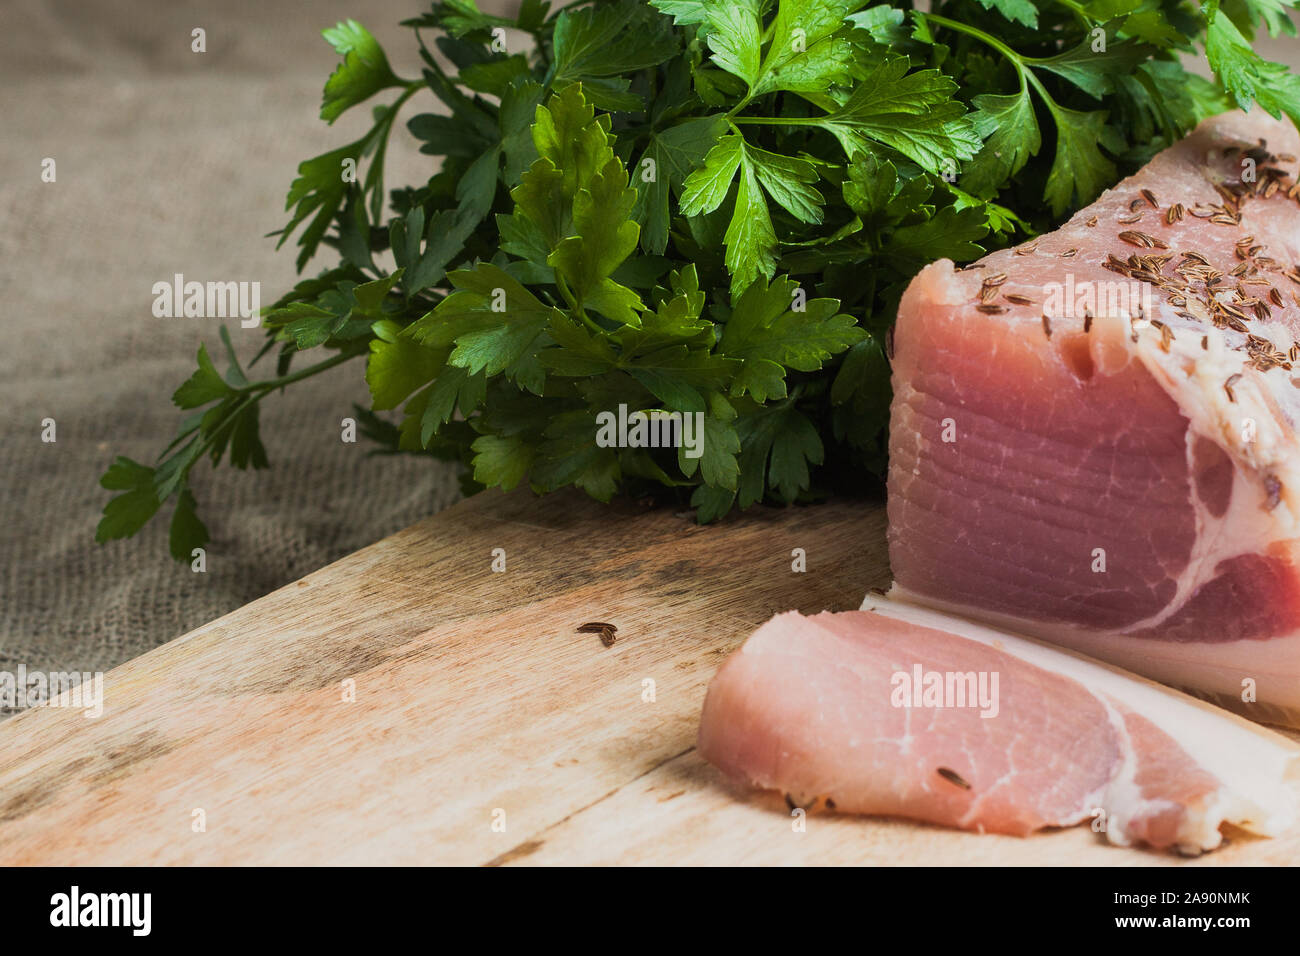 Appetizer in Russian - lard, garlic and parsley on the board Stock Photo